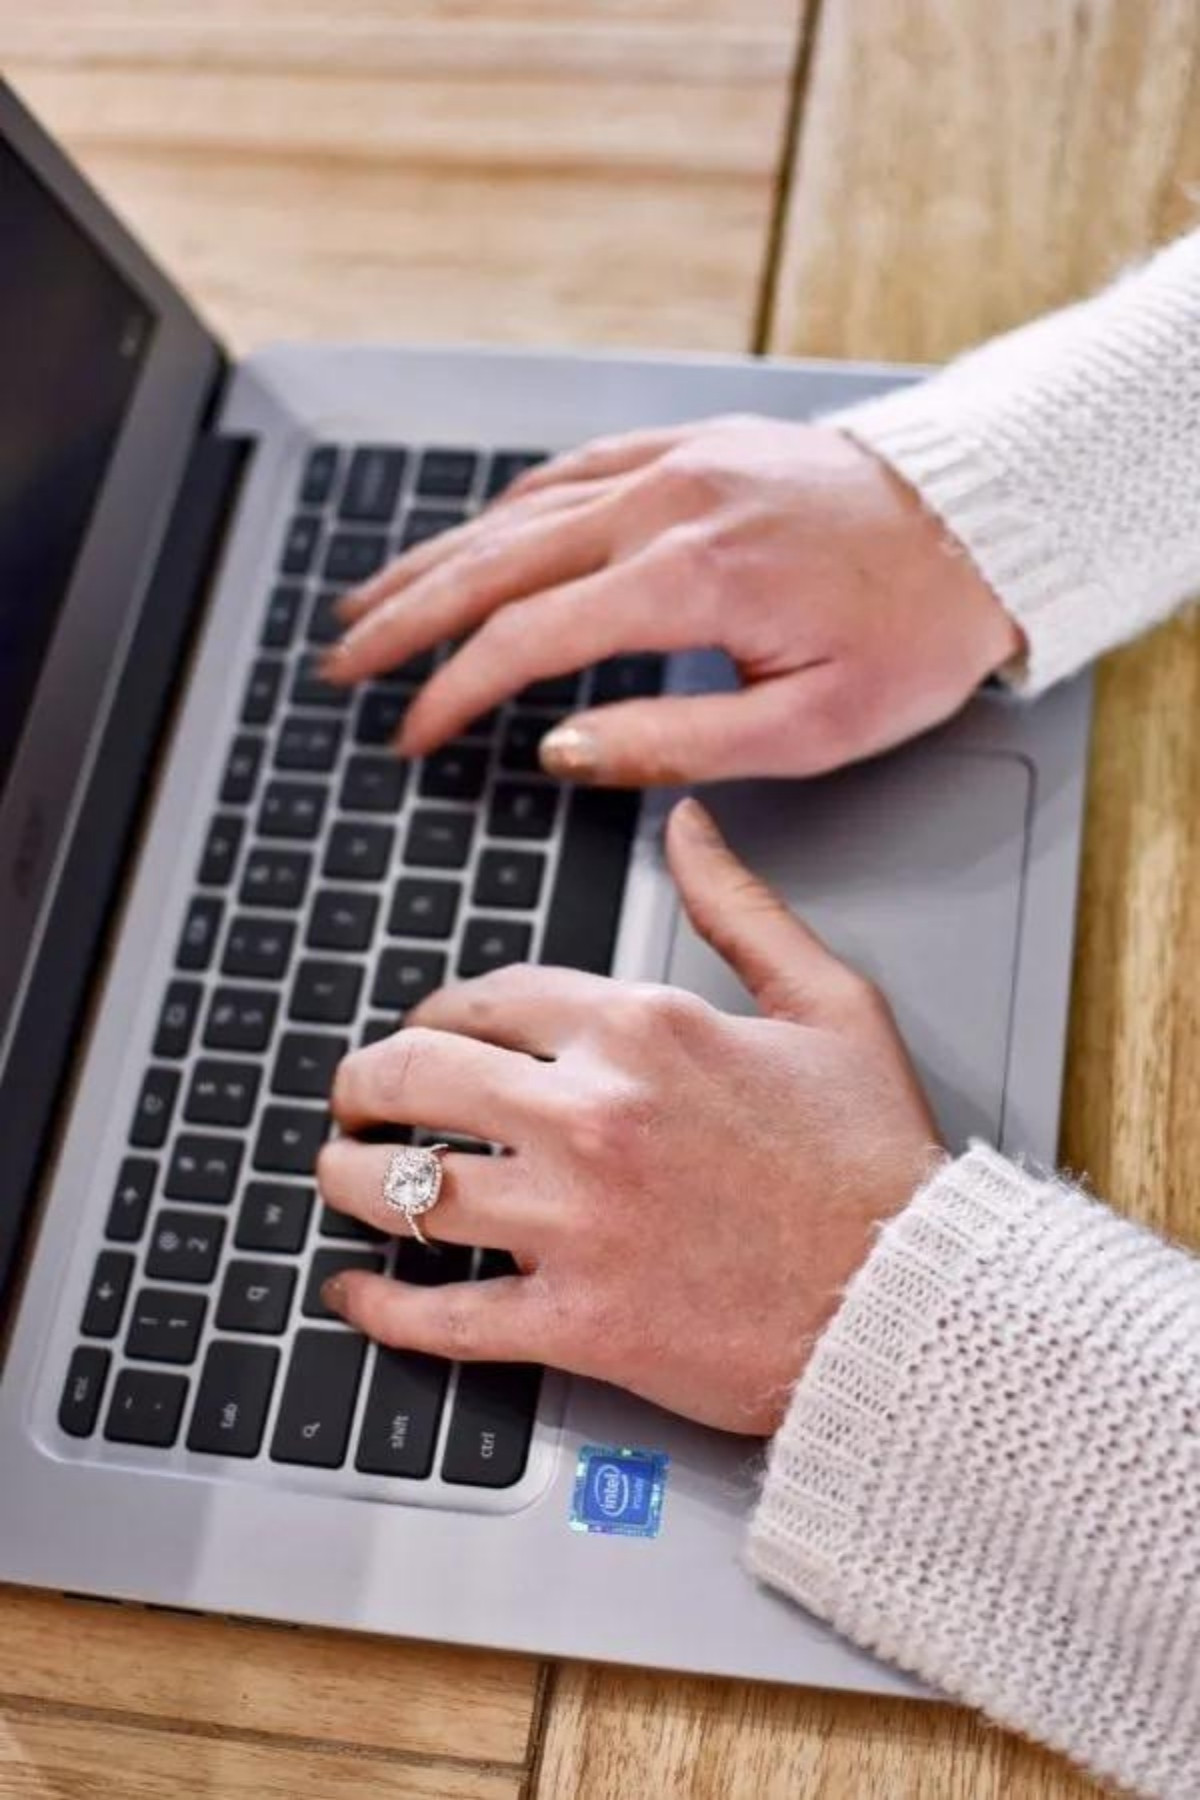 Woman's wearing a diamond ring and nail polish types on laptop computer.